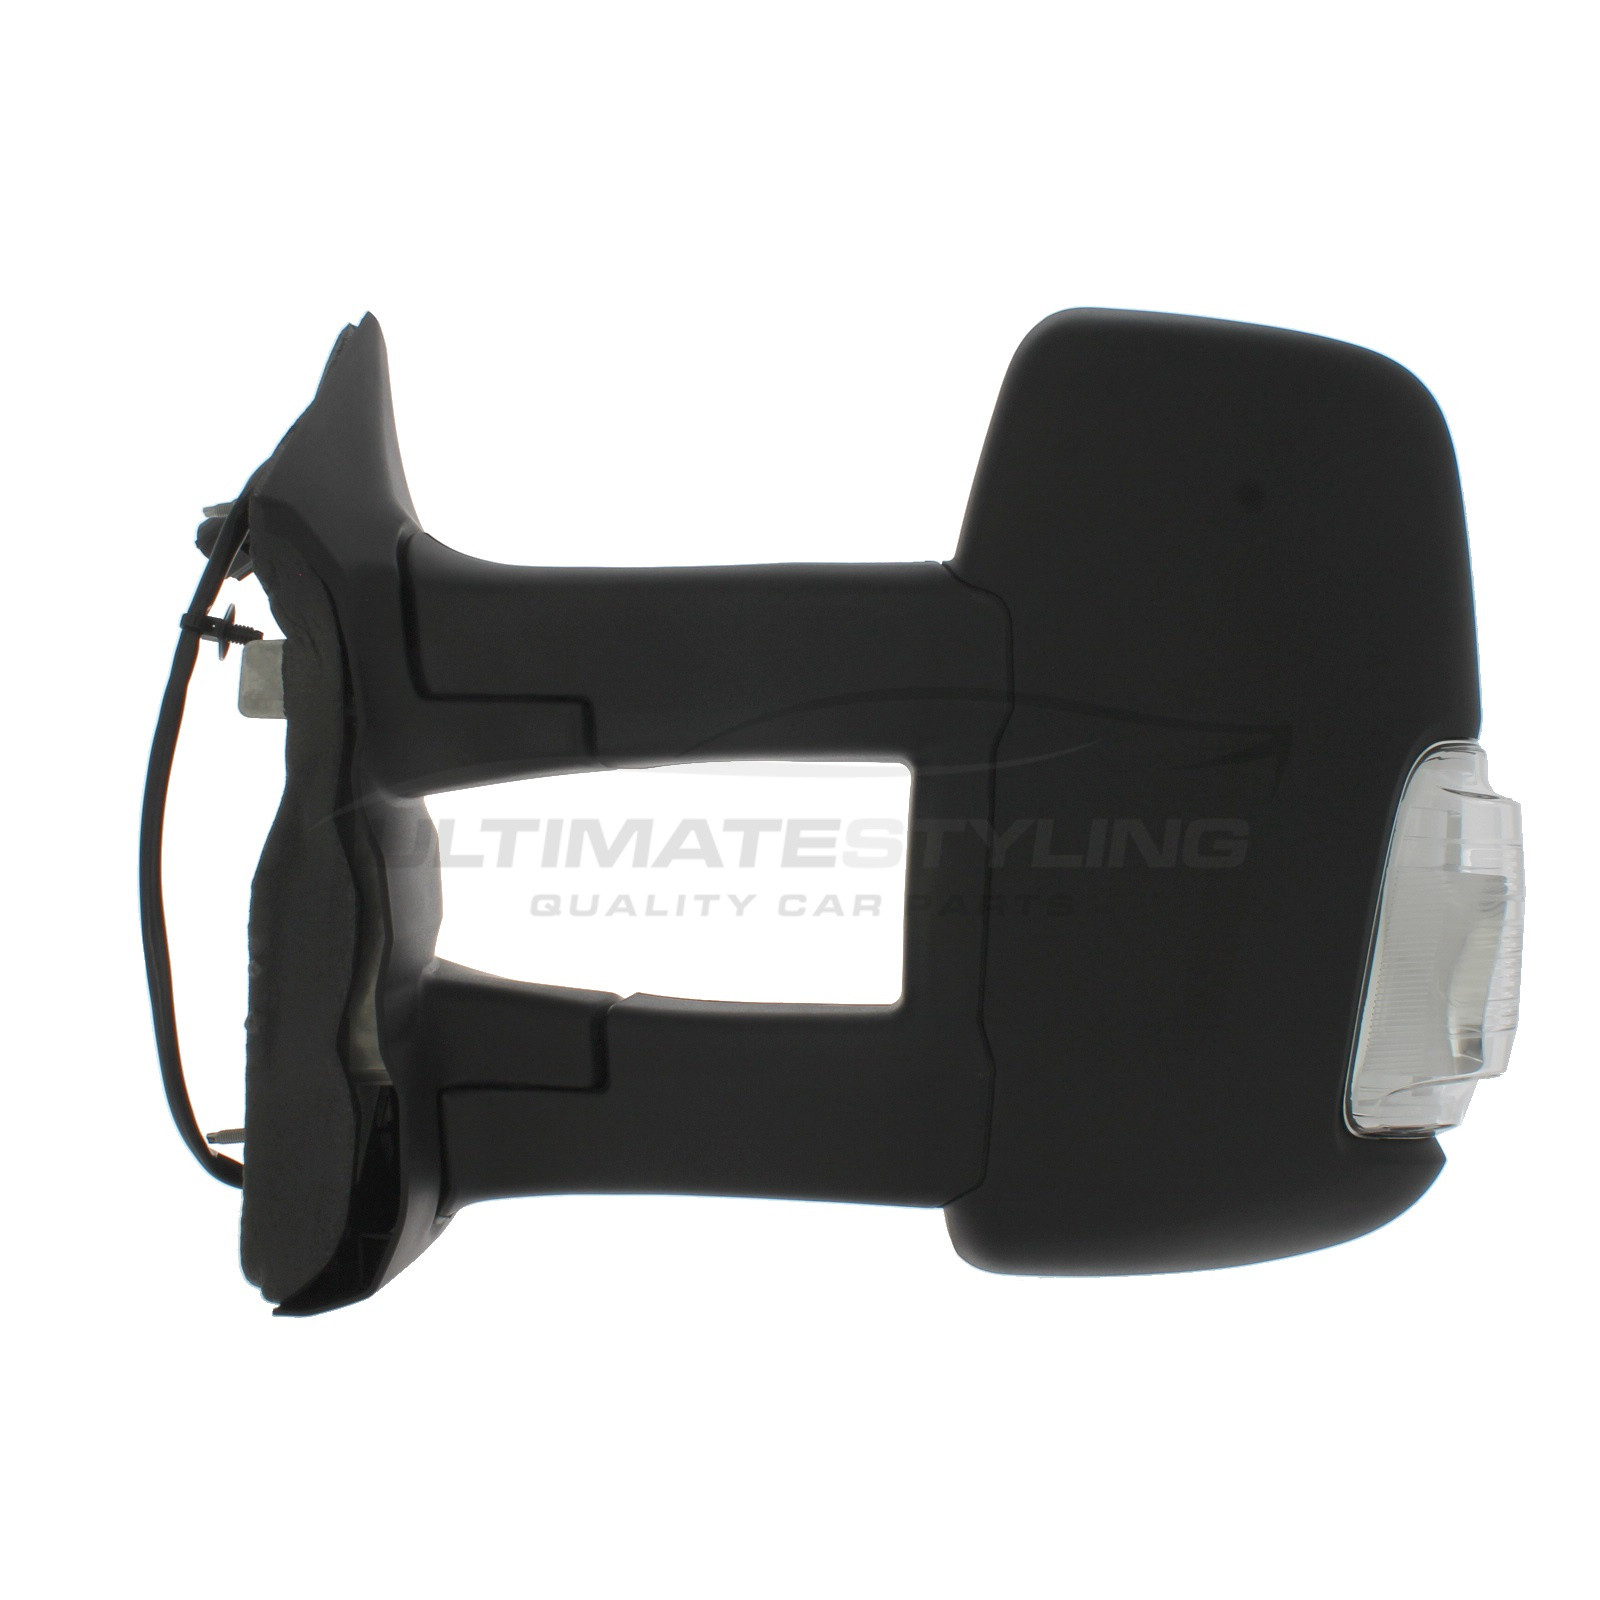 Ford Transit Wing Mirror / Door Mirror - Passenger Side (LH) - Electric adjustment - Heated Glass - Indicator - Black - Textured